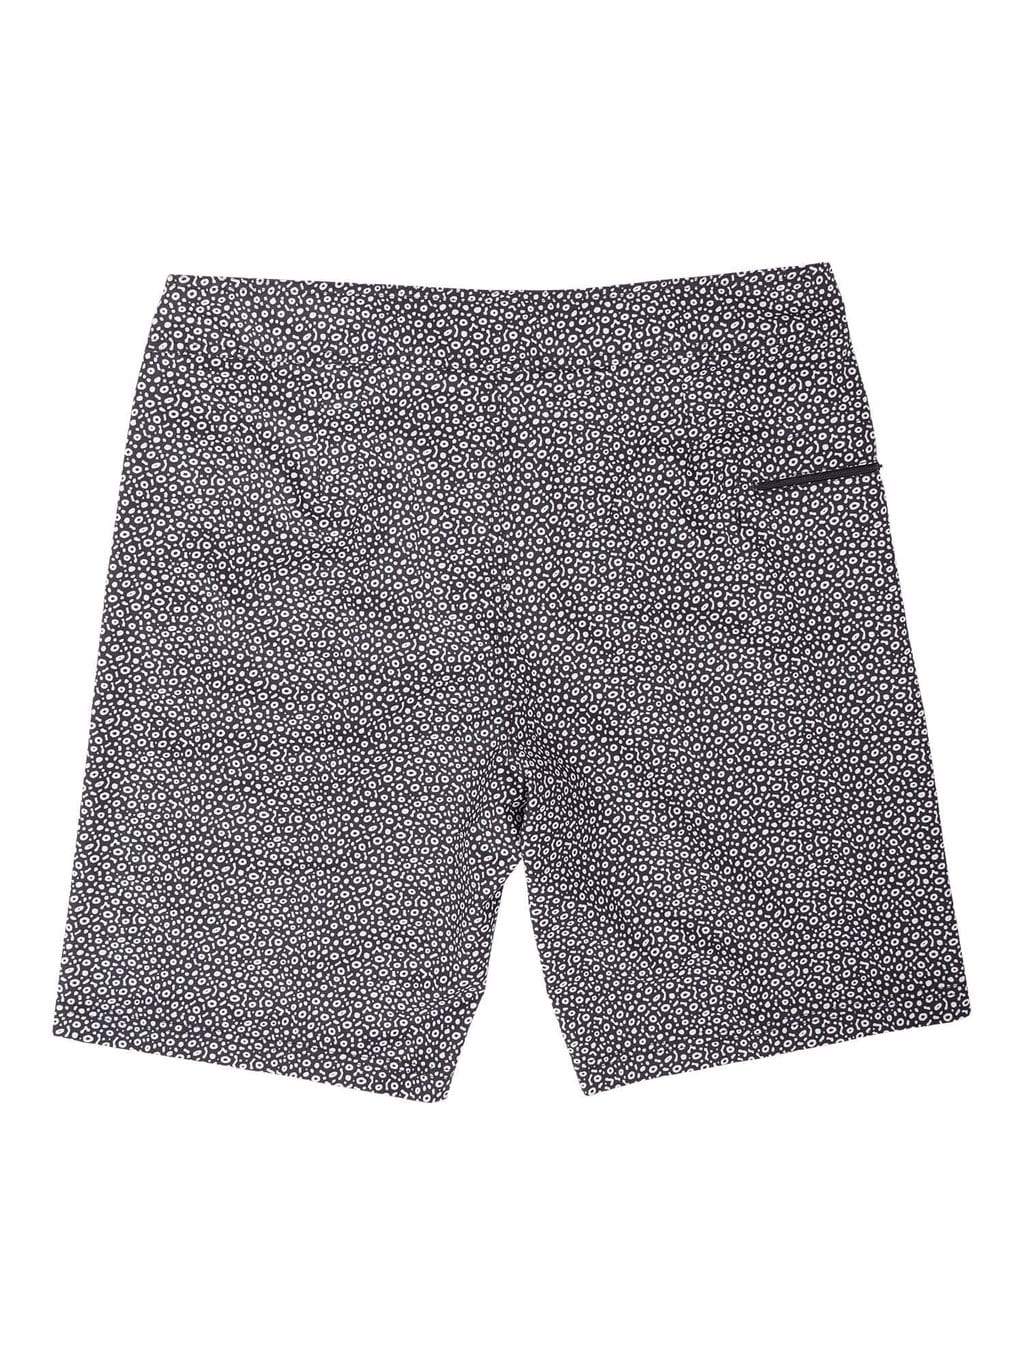 Waterlust Spotted Eagle Ray Boardshorts flat off body view of back of shorts